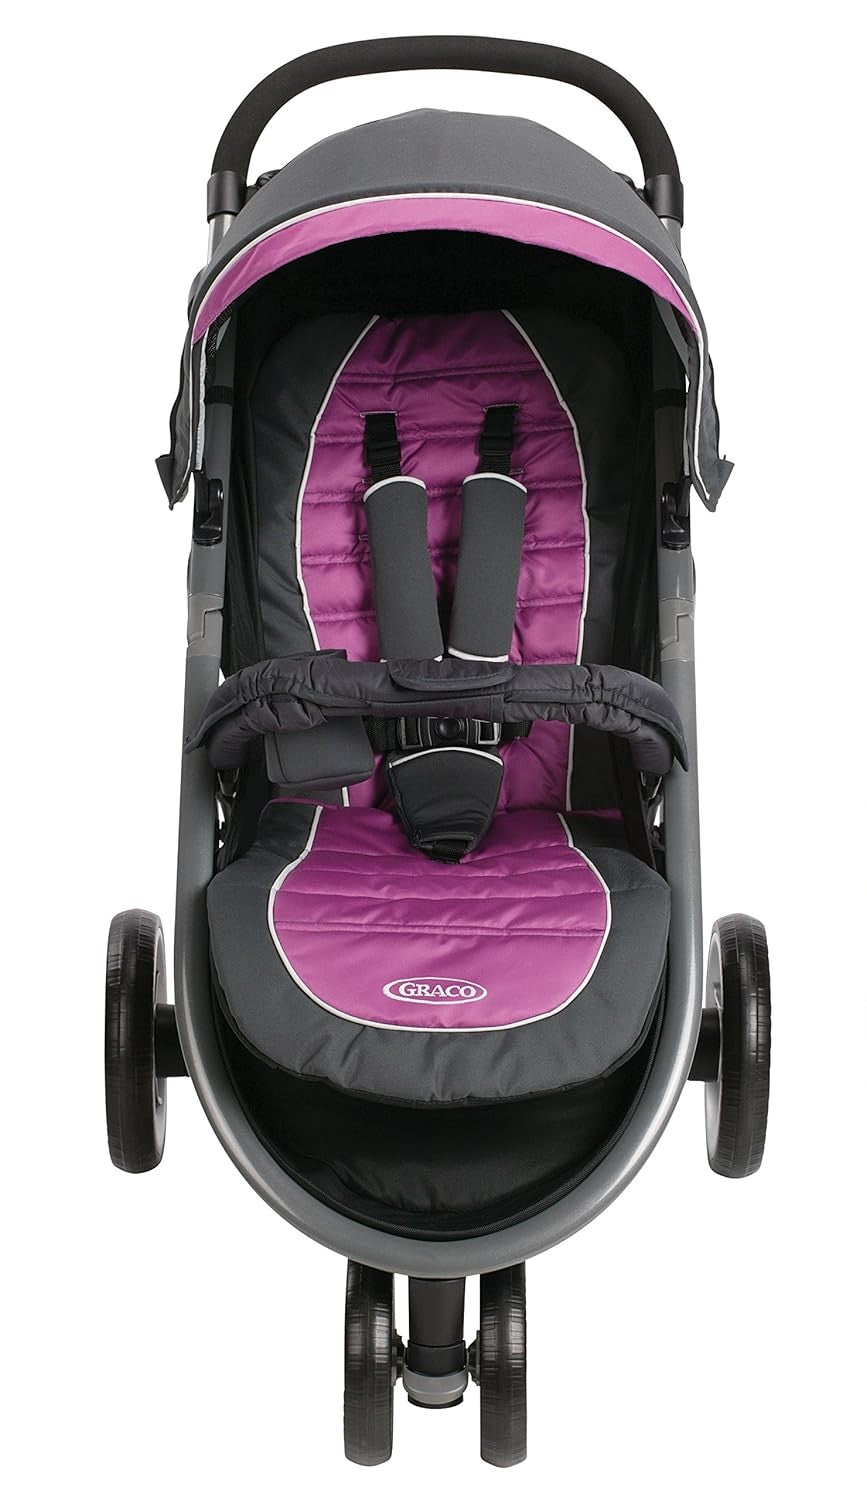 Graco Aire3 Click Connect stroller